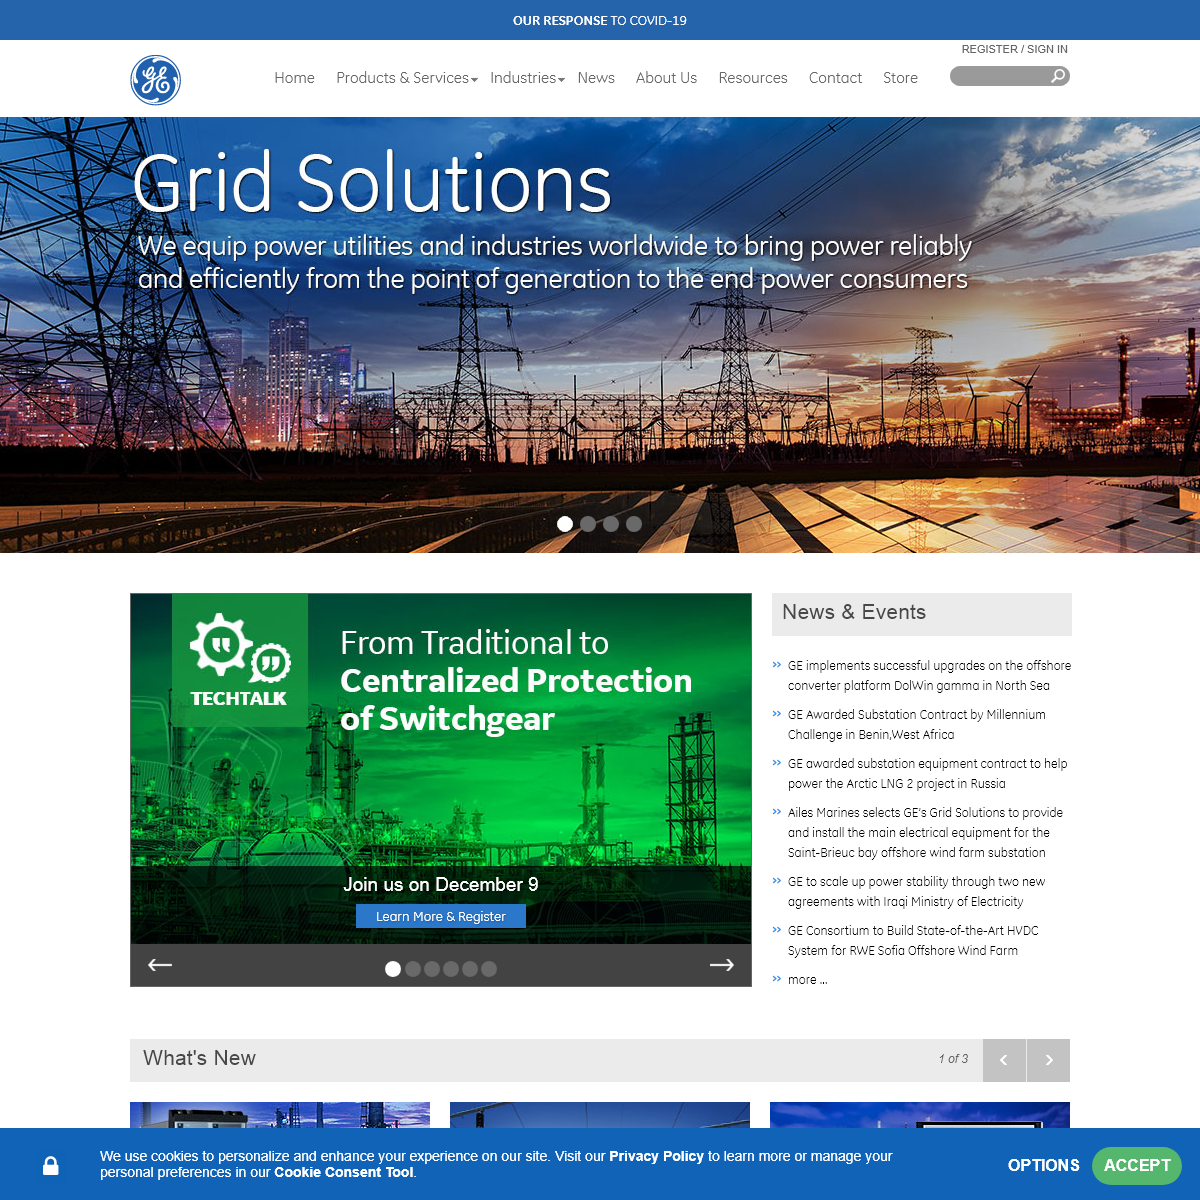 A complete backup of gegridsolutions.com